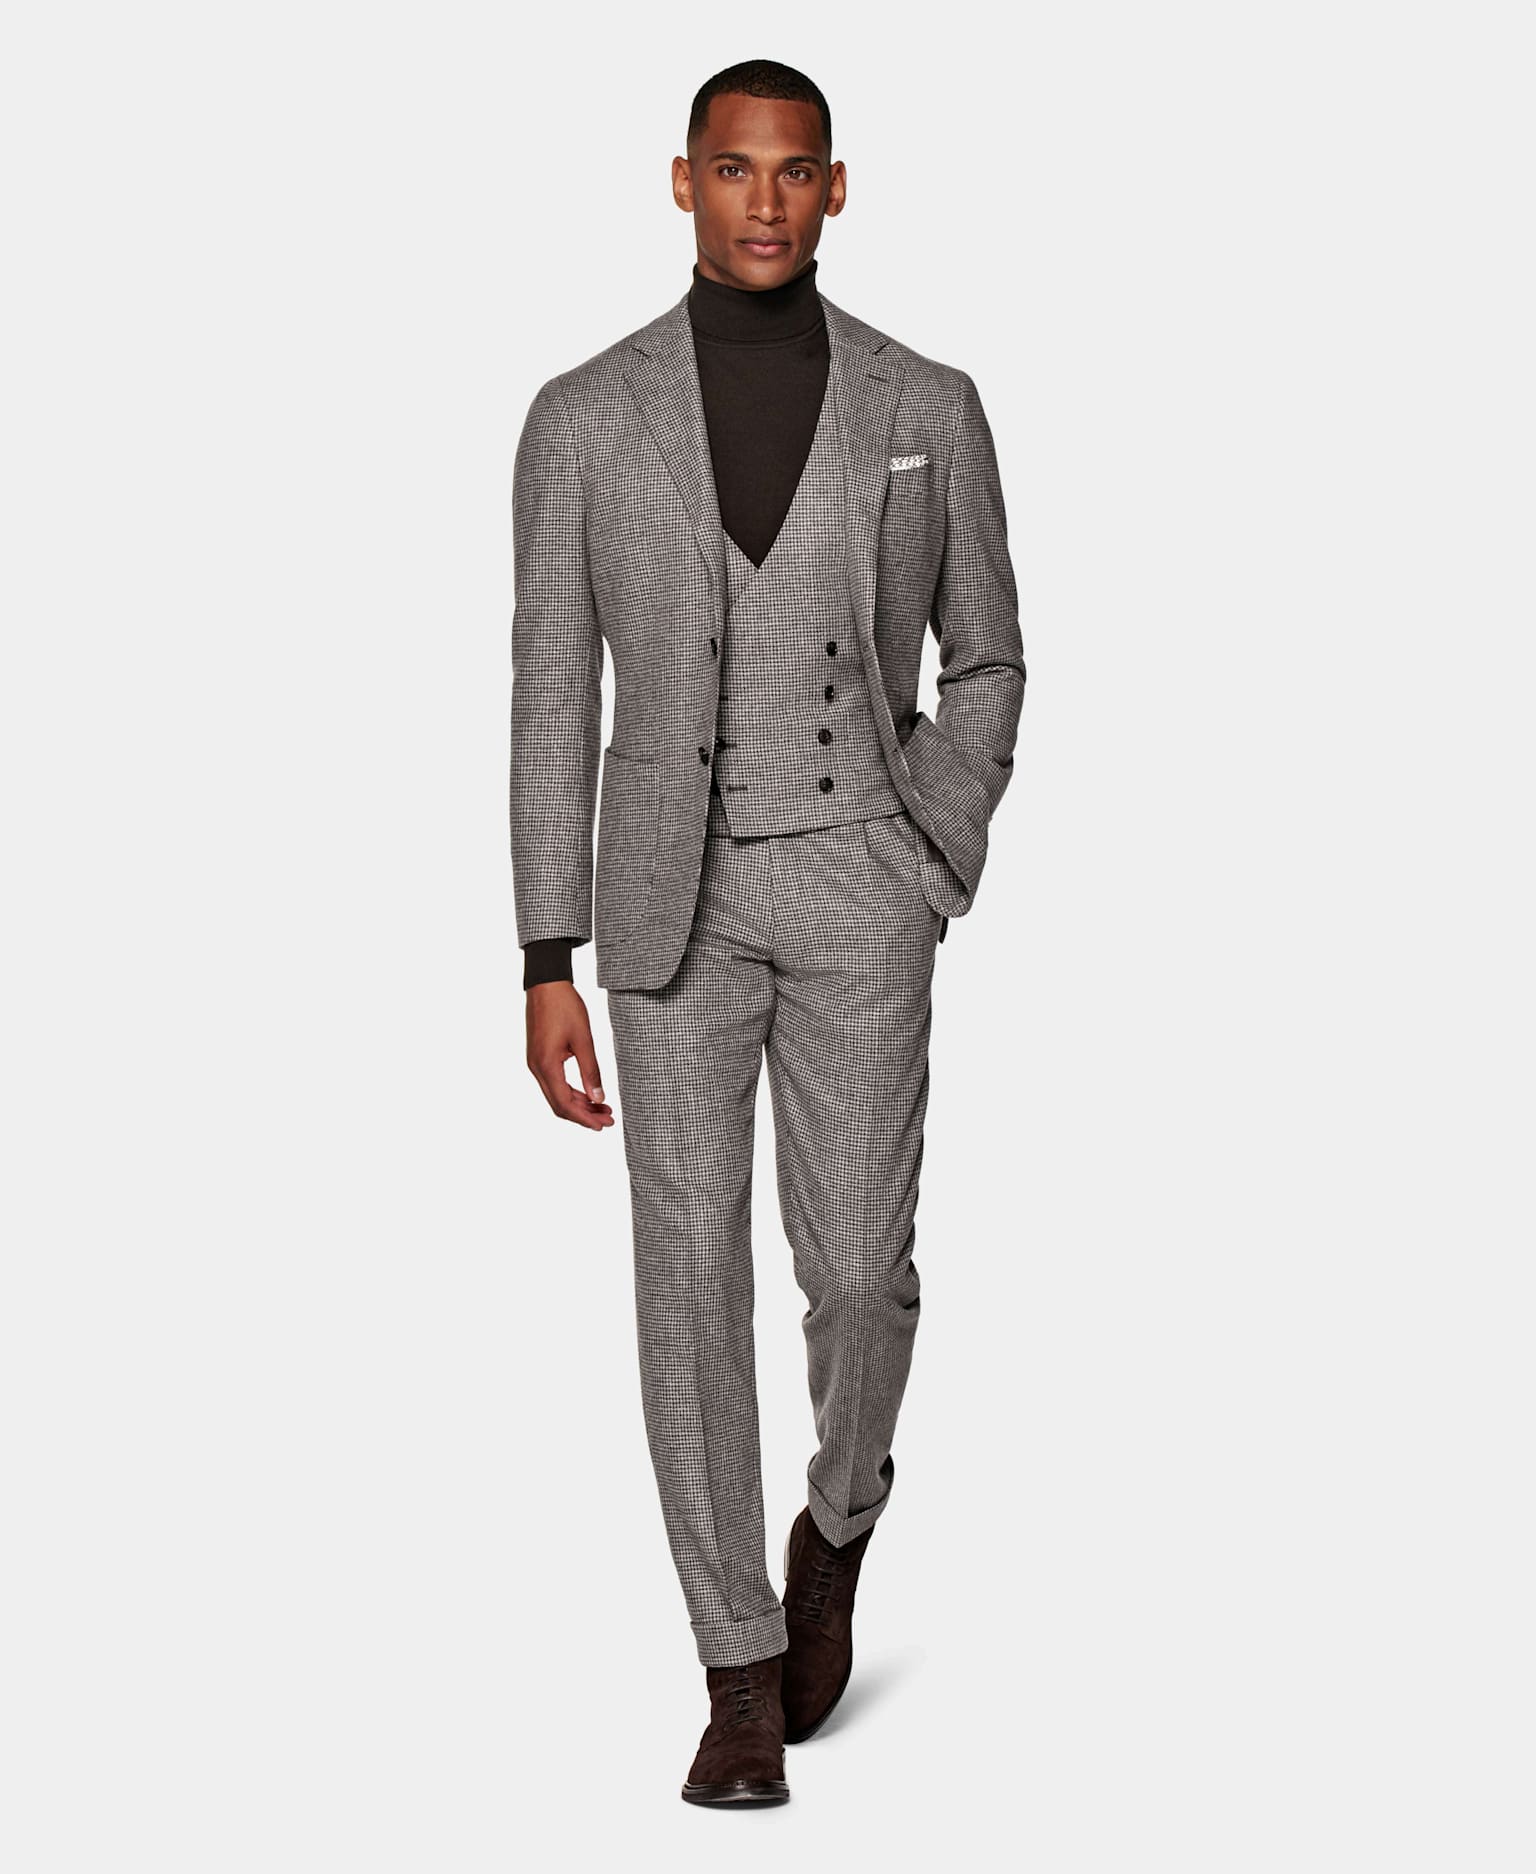 A houndstooth check suit for a winter wedding look. 